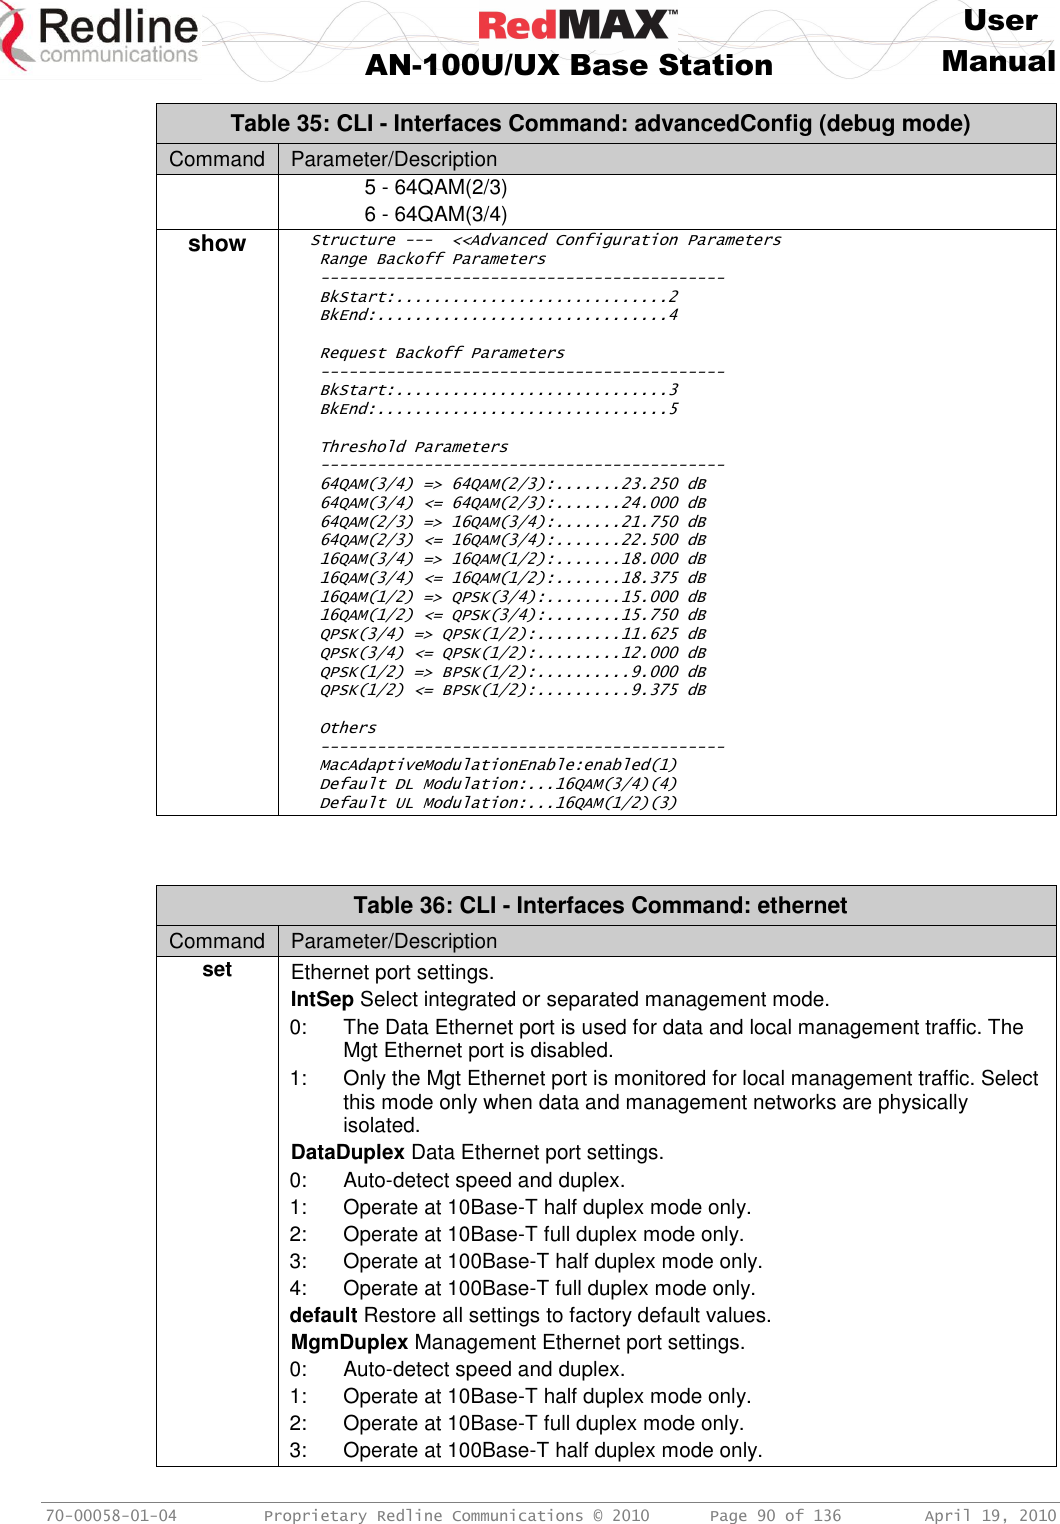     User  AN-100U/UX Base Station Manual   70-00058-01-04  Proprietary Redline Communications © 2010   Page 90 of 136  April 19, 2010 Table 35: CLI - Interfaces Command: advancedConfig (debug mode) Command Parameter/Description  5 - 64QAM(2/3)  6 - 64QAM(3/4) show   Structure ---  &lt;&lt;Advanced Configuration Parameters    Range Backoff Parameters    -------------------------------------------    BkStart:.............................2    BkEnd:...............................4     Request Backoff Parameters    -------------------------------------------    BkStart:.............................3    BkEnd:...............................5     Threshold Parameters    -------------------------------------------    64QAM(3/4) =&gt; 64QAM(2/3):.......23.250 dB    64QAM(3/4) &lt;= 64QAM(2/3):.......24.000 dB    64QAM(2/3) =&gt; 16QAM(3/4):.......21.750 dB    64QAM(2/3) &lt;= 16QAM(3/4):.......22.500 dB    16QAM(3/4) =&gt; 16QAM(1/2):.......18.000 dB    16QAM(3/4) &lt;= 16QAM(1/2):.......18.375 dB    16QAM(1/2) =&gt; QPSK(3/4):........15.000 dB    16QAM(1/2) &lt;= QPSK(3/4):........15.750 dB    QPSK(3/4) =&gt; QPSK(1/2):.........11.625 dB    QPSK(3/4) &lt;= QPSK(1/2):.........12.000 dB    QPSK(1/2) =&gt; BPSK(1/2):..........9.000 dB    QPSK(1/2) &lt;= BPSK(1/2):..........9.375 dB     Others    -------------------------------------------    MacAdaptiveModulationEnable:enabled(1)    Default DL Modulation:...16QAM(3/4)(4)    Default UL Modulation:...16QAM(1/2)(3)   Table 36: CLI - Interfaces Command: ethernet Command Parameter/Description set Ethernet port settings. IntSep Select integrated or separated management mode. 0: The Data Ethernet port is used for data and local management traffic. The Mgt Ethernet port is disabled. 1:  Only the Mgt Ethernet port is monitored for local management traffic. Select this mode only when data and management networks are physically isolated. DataDuplex Data Ethernet port settings. 0:  Auto-detect speed and duplex. 1:  Operate at 10Base-T half duplex mode only. 2:  Operate at 10Base-T full duplex mode only. 3:  Operate at 100Base-T half duplex mode only. 4:  Operate at 100Base-T full duplex mode only. default Restore all settings to factory default values. MgmDuplex Management Ethernet port settings. 0:  Auto-detect speed and duplex. 1:  Operate at 10Base-T half duplex mode only. 2:  Operate at 10Base-T full duplex mode only. 3:  Operate at 100Base-T half duplex mode only.   